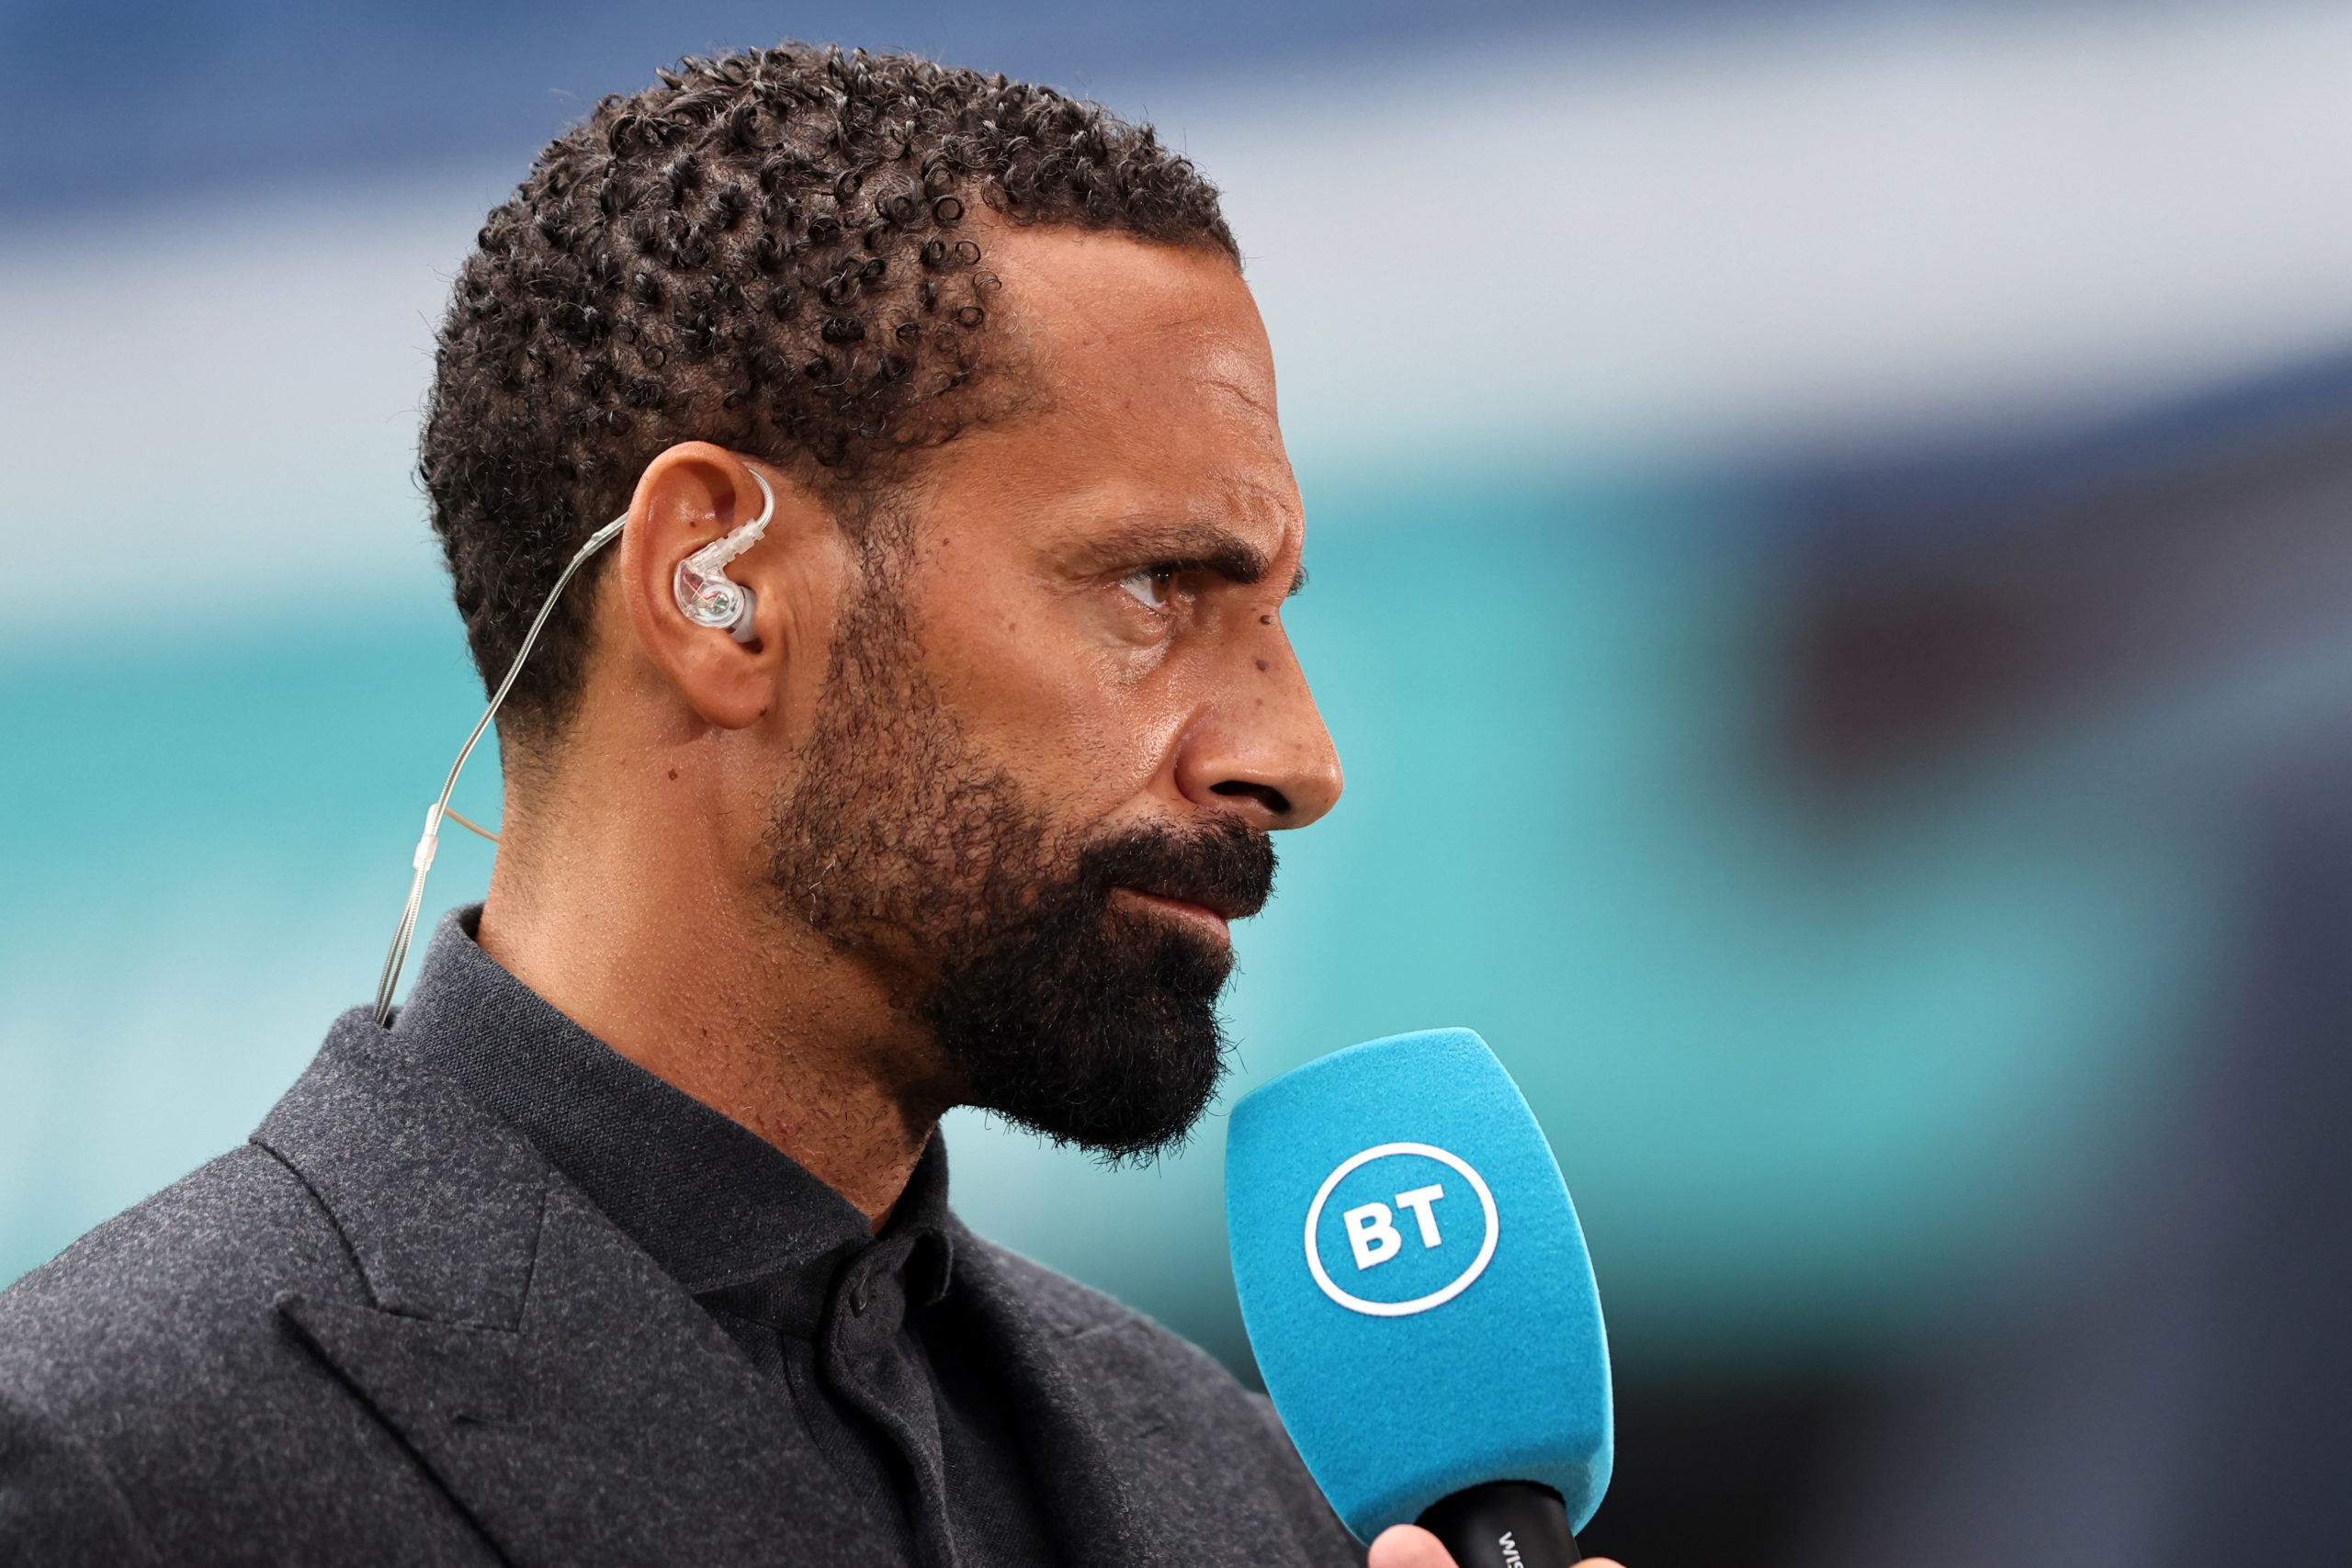 ‘Like a man playing against boys’: Rio Ferdinand reacts to Chelsea player’s display v Leicester